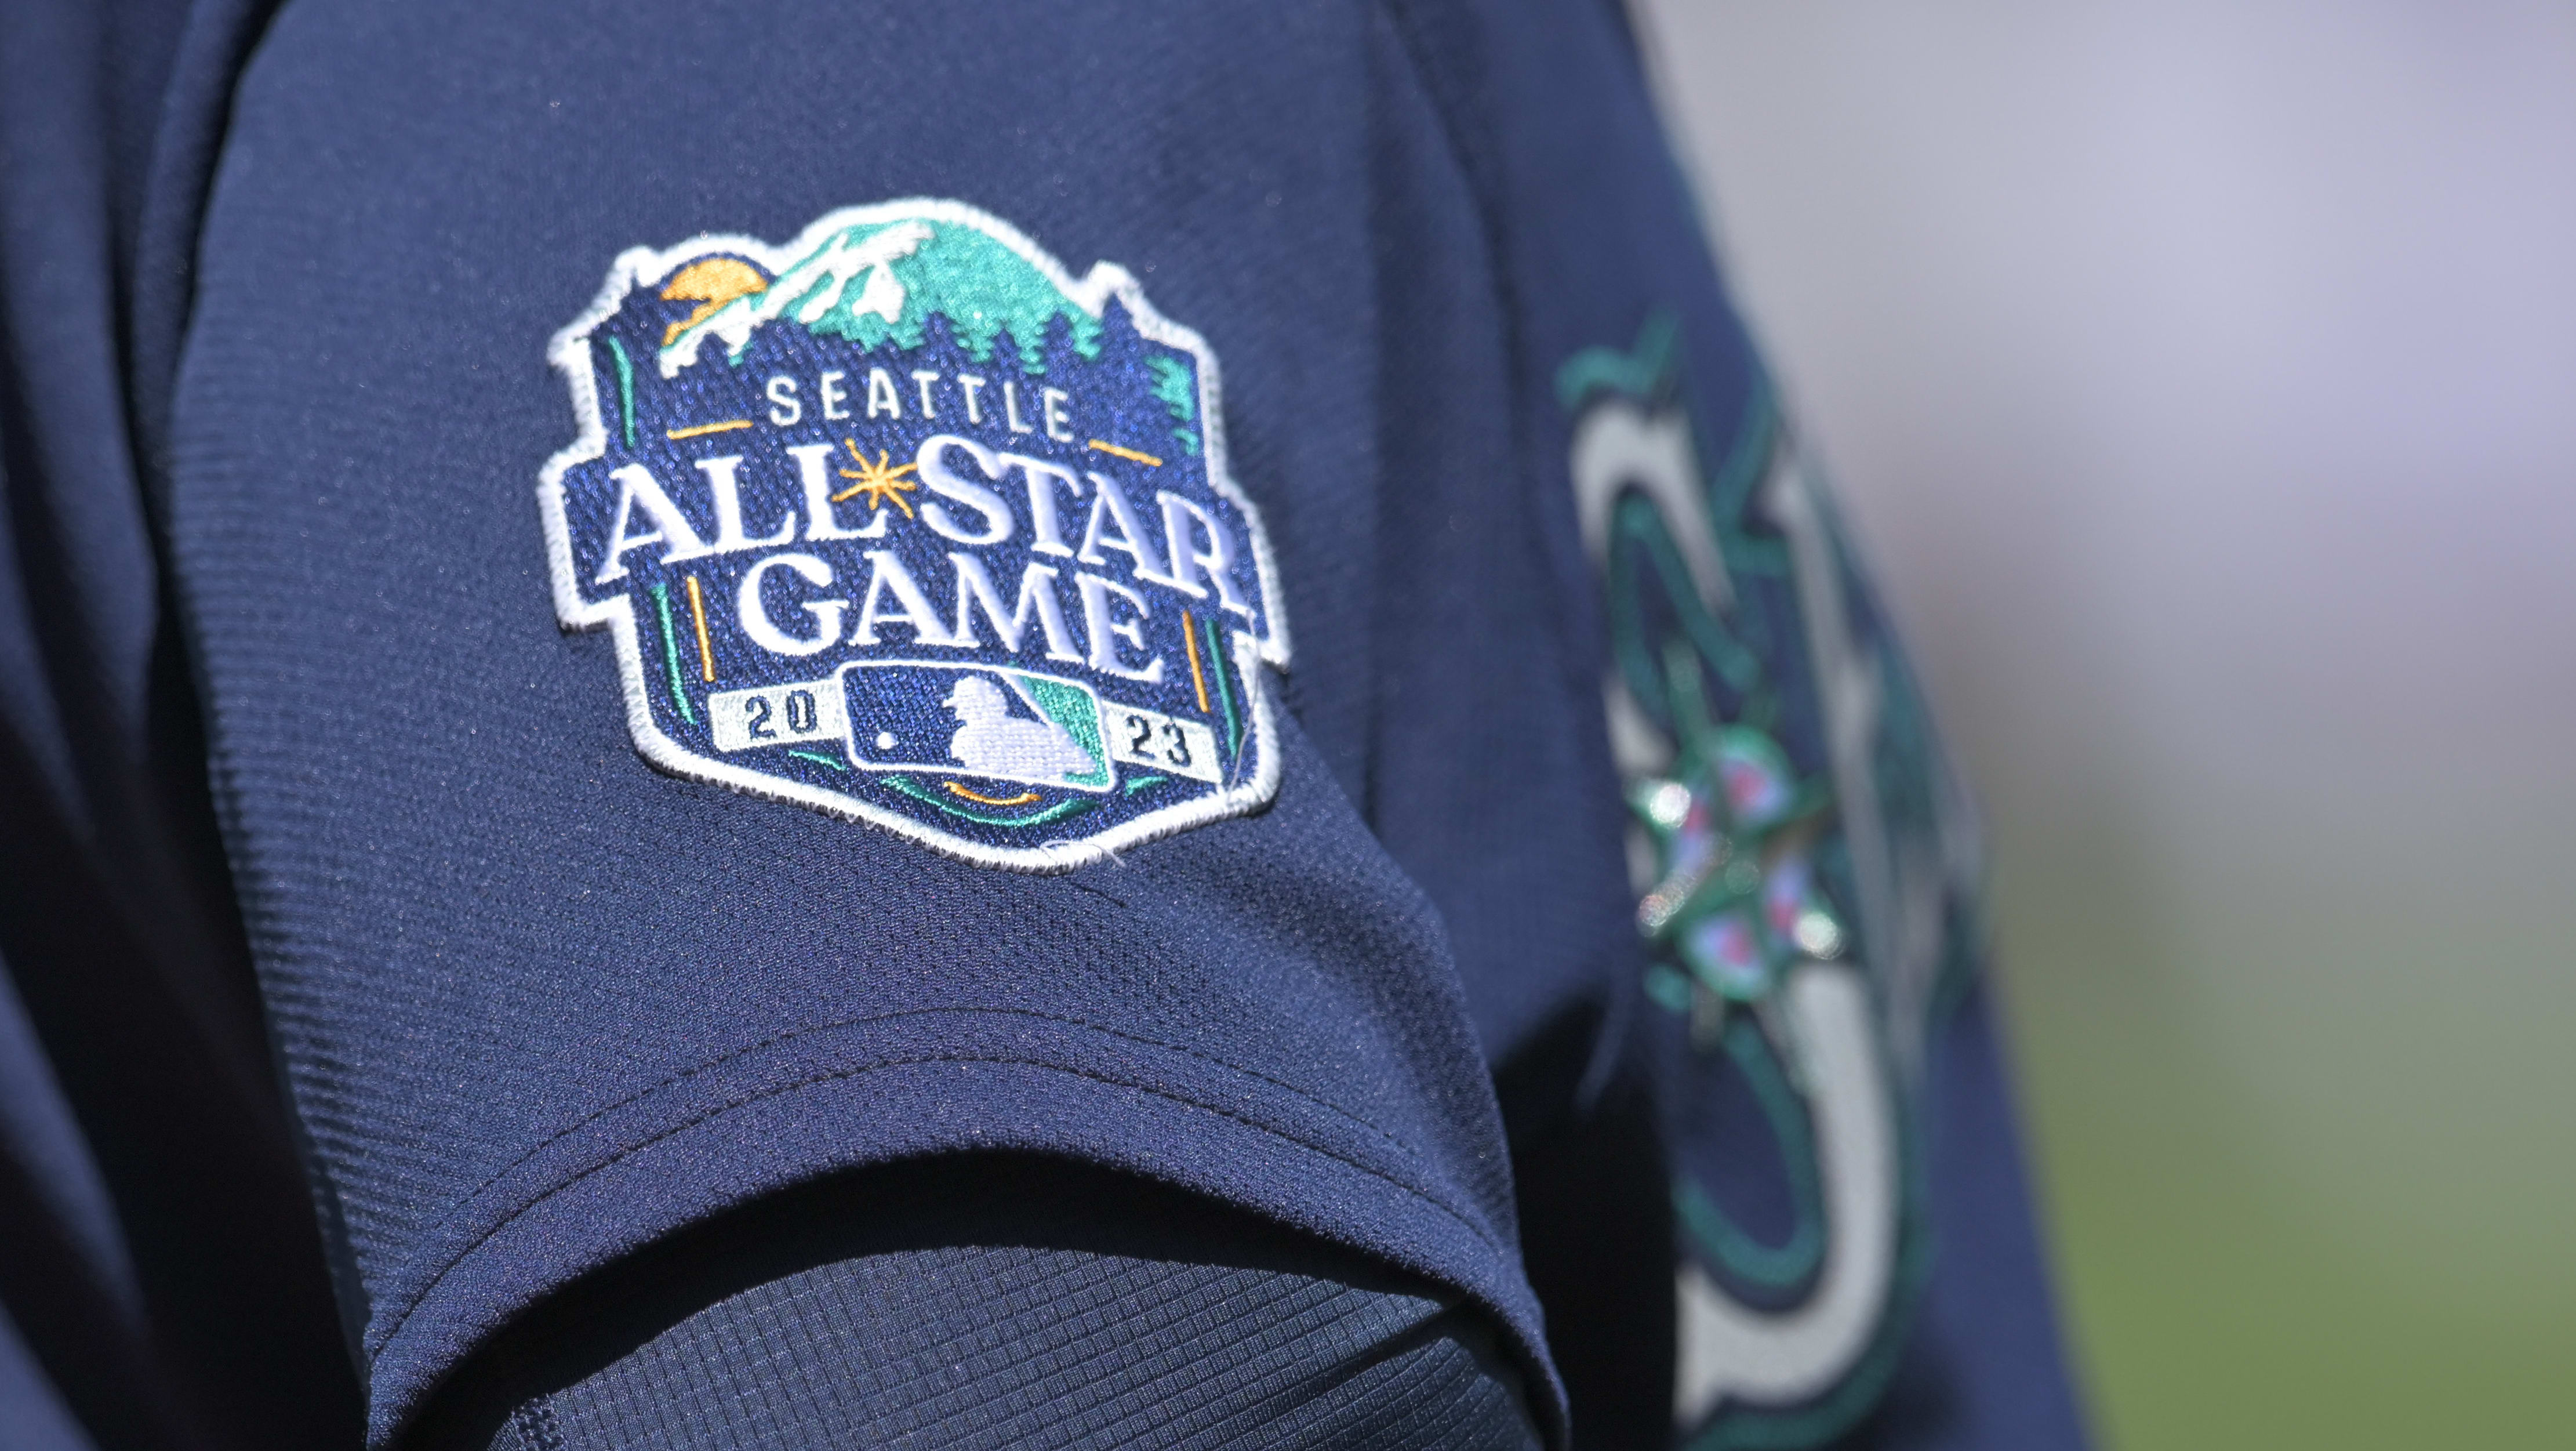 Seattle Mariners to host 2023 MLB All-Star Game